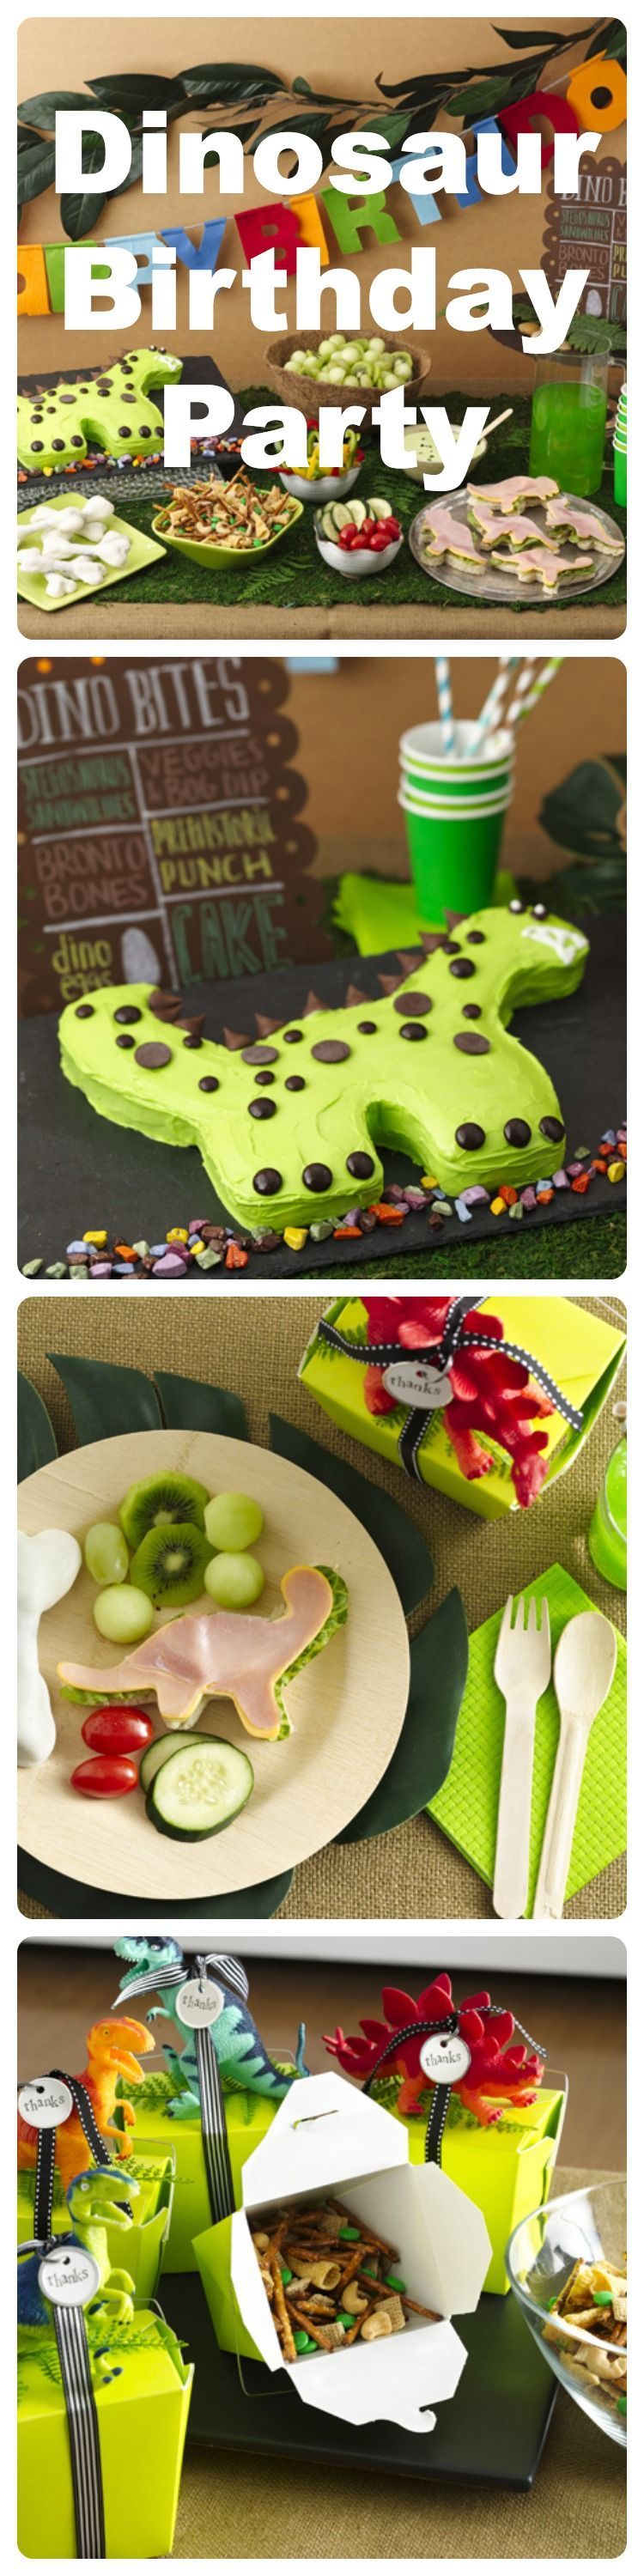 Create a Jurassic-era bash that’s easy to DIY. Click through for tips, décor ideas and a dino-themed menu that will make the